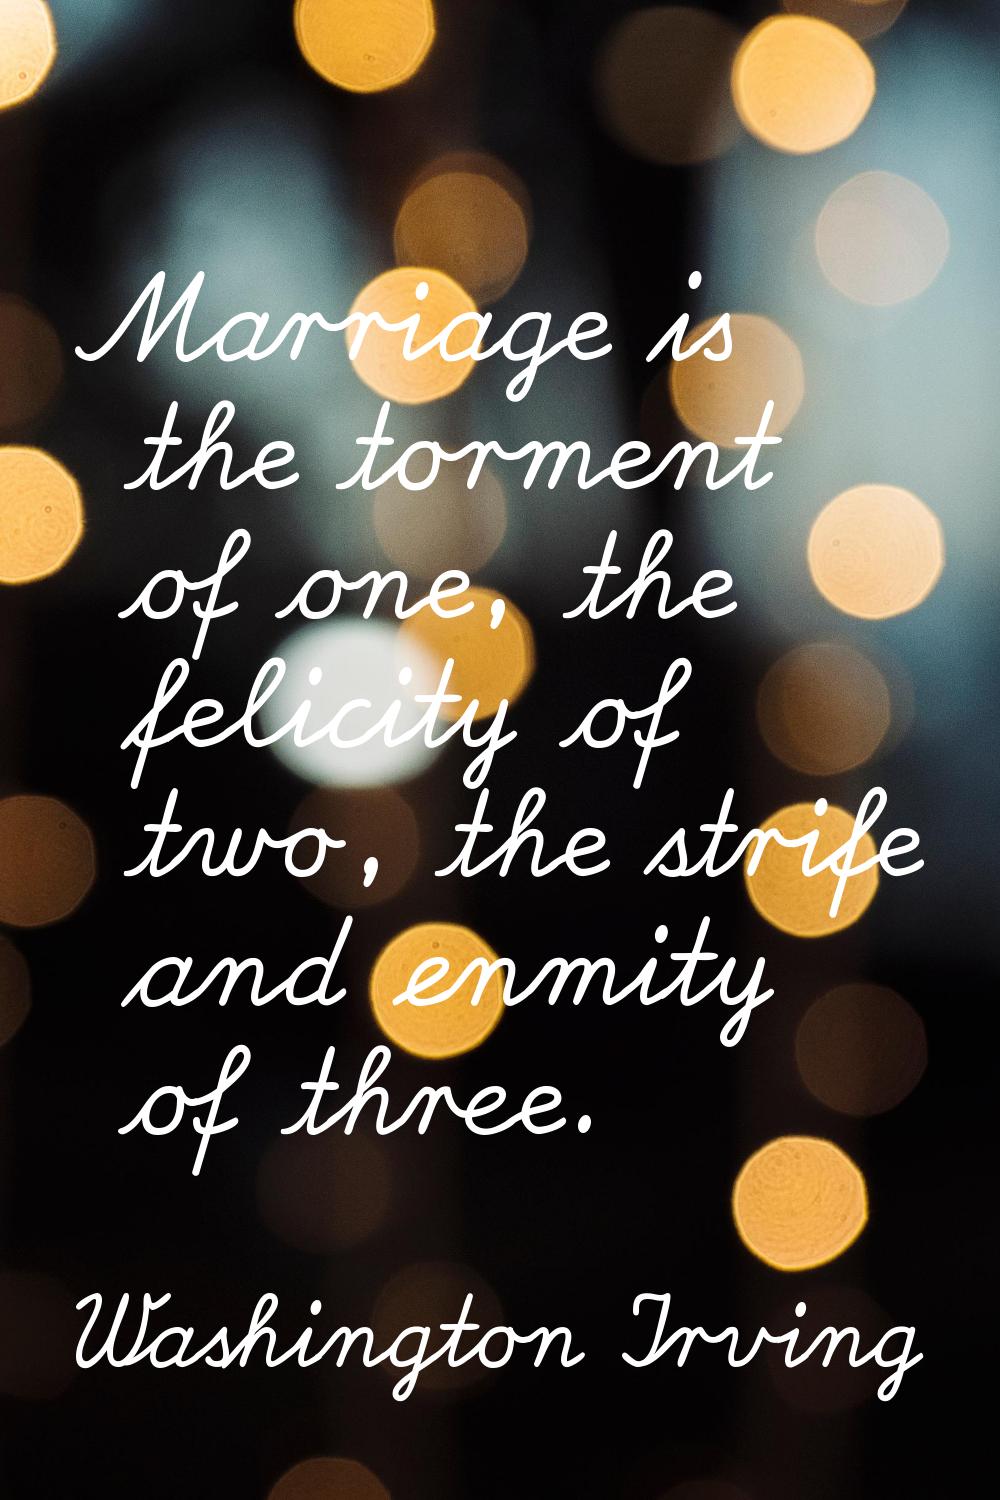 Marriage is the torment of one, the felicity of two, the strife and enmity of three.